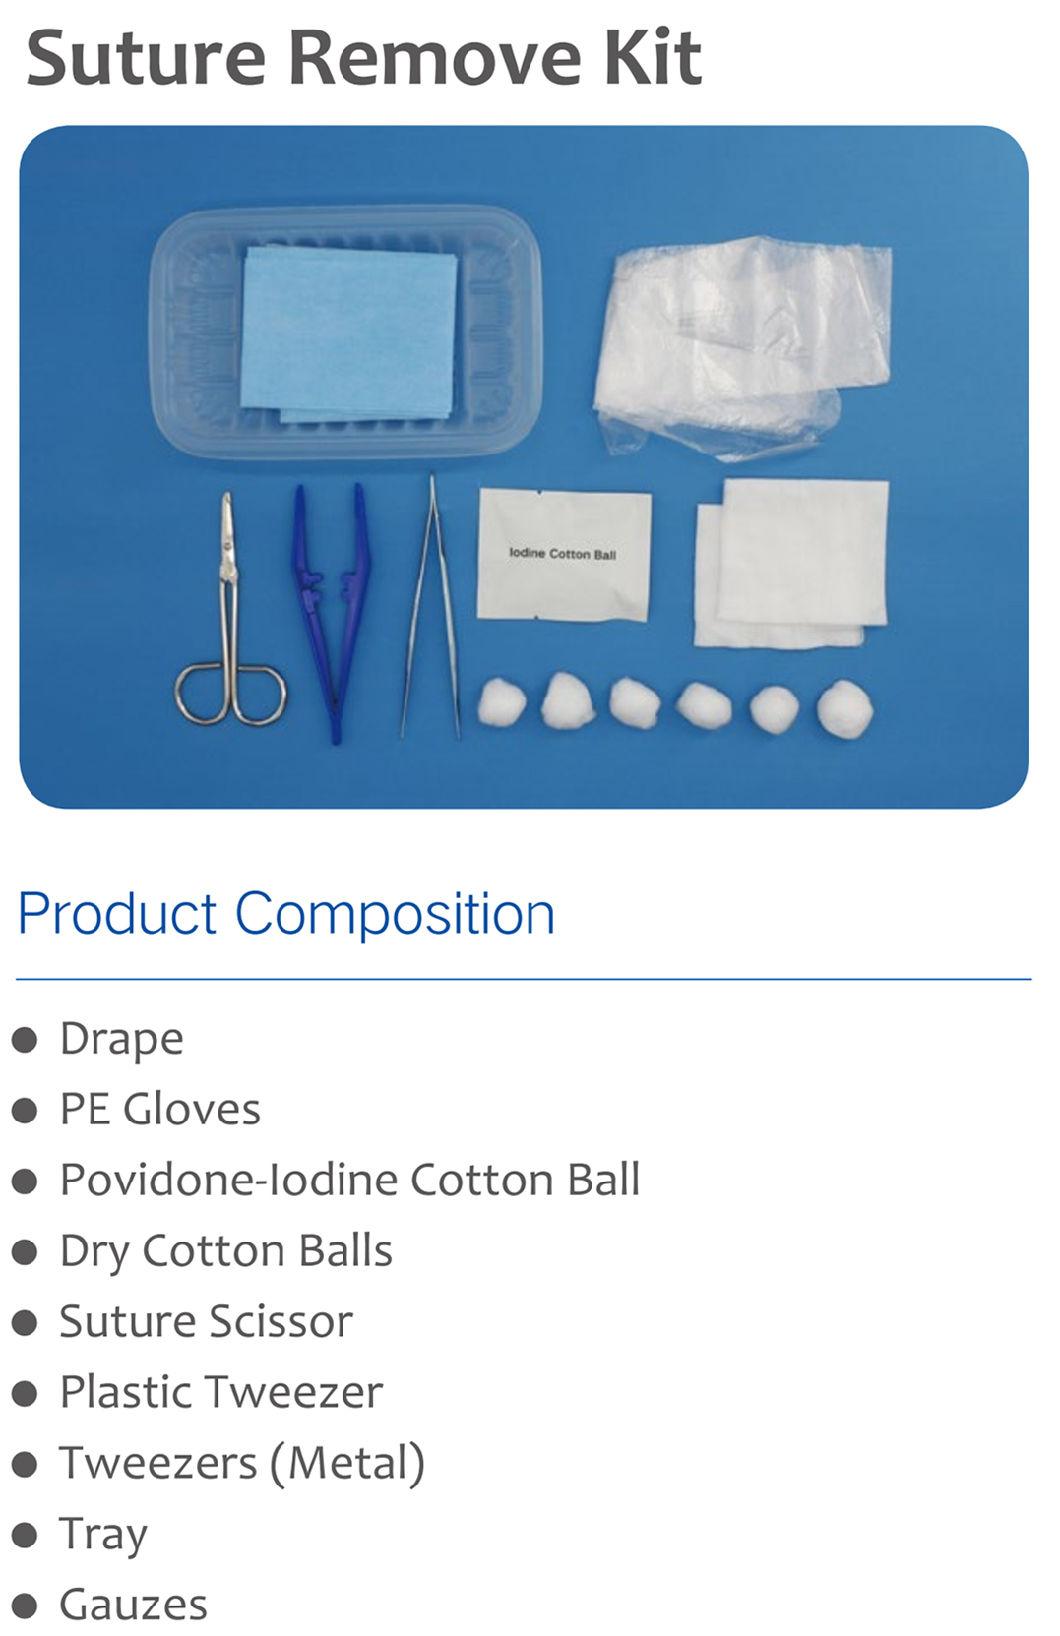 Suture Remove Kit Supply Can Be Adjusted According Requirements